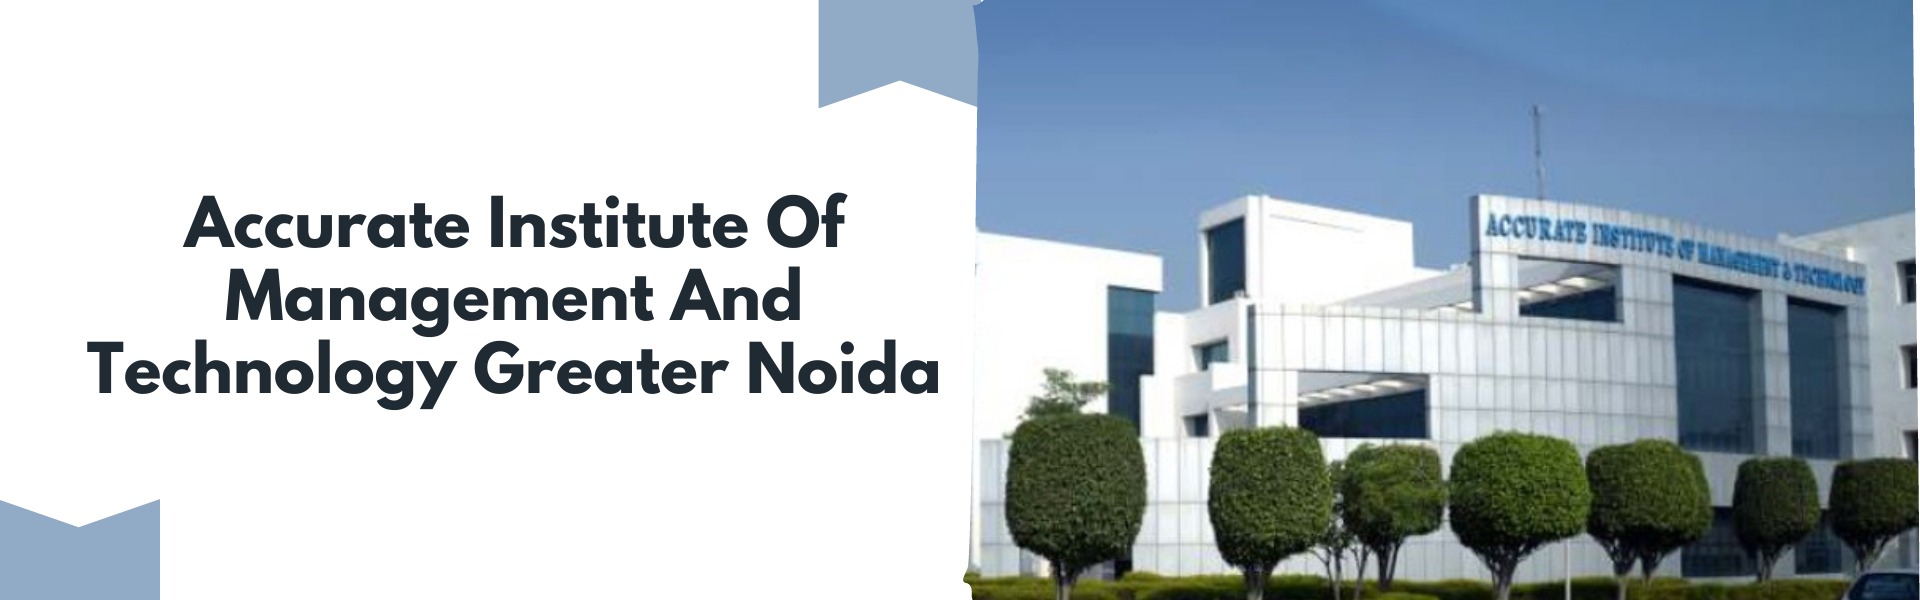 Accurate Institute Of Management And Technology Greater Noida